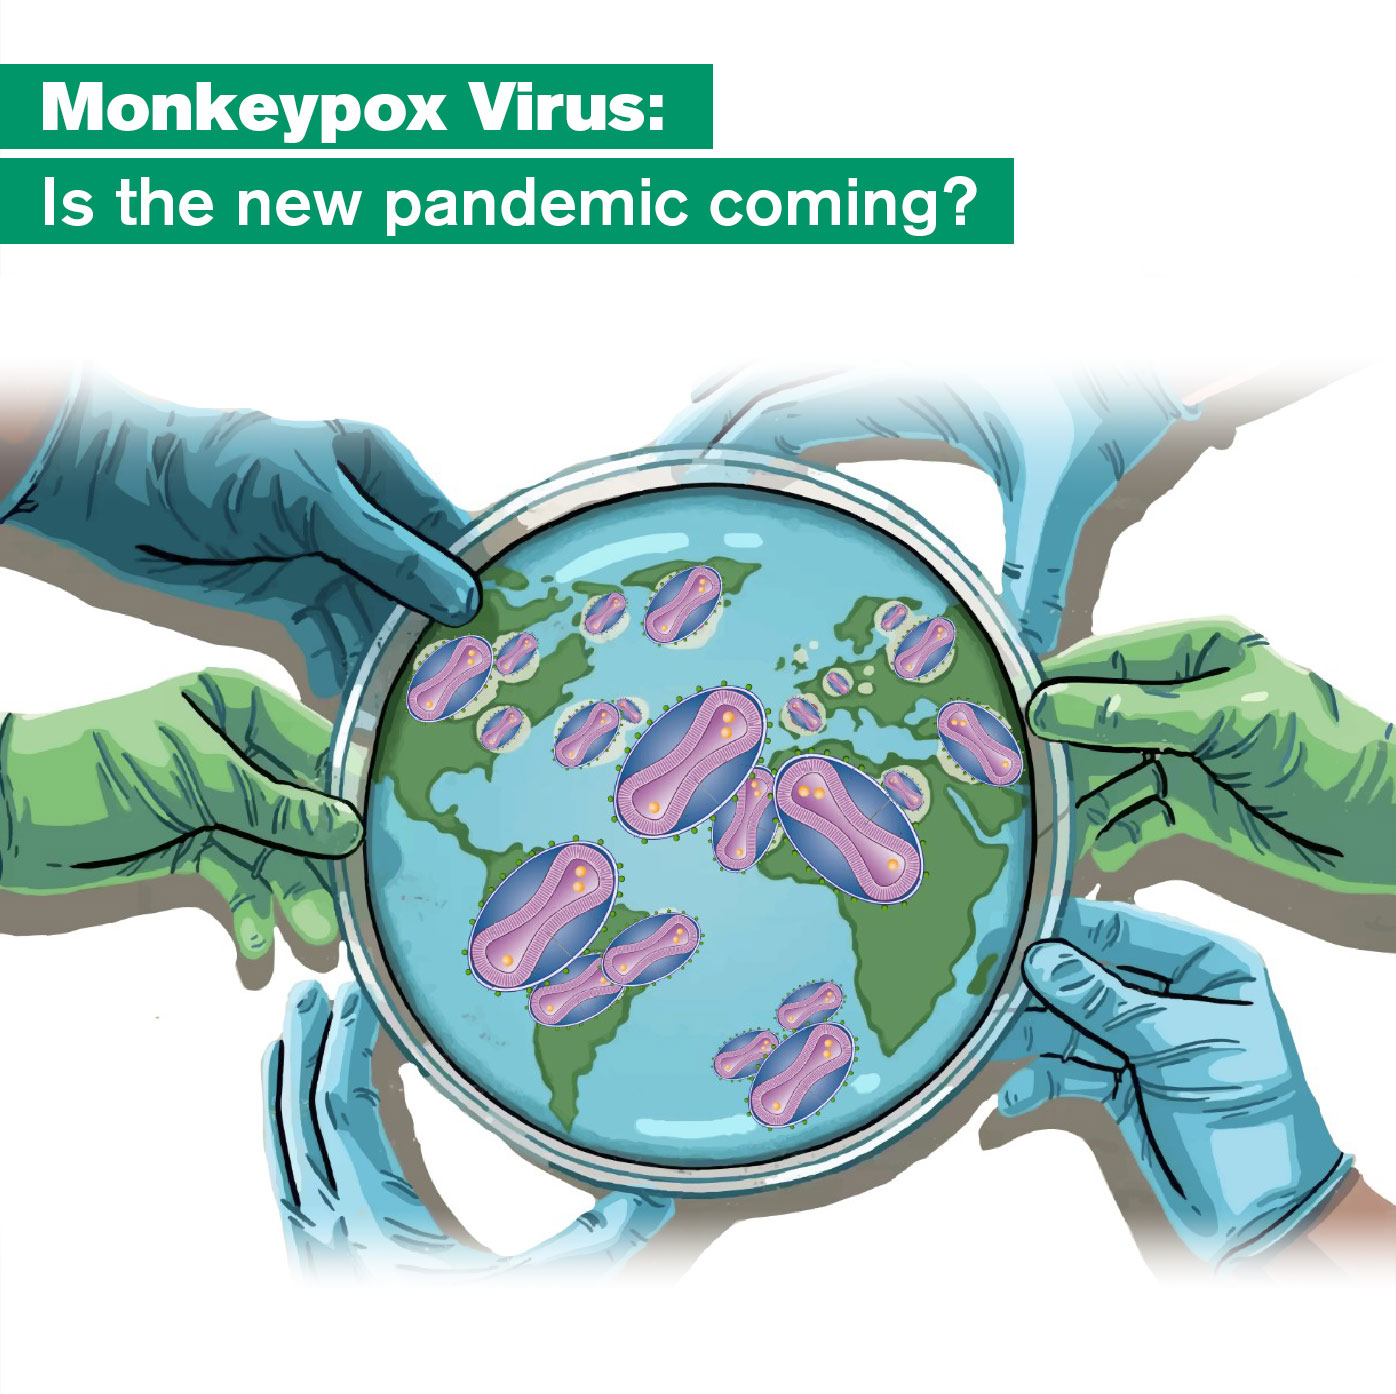 Monkeypox Virus Is the new pandemic coming